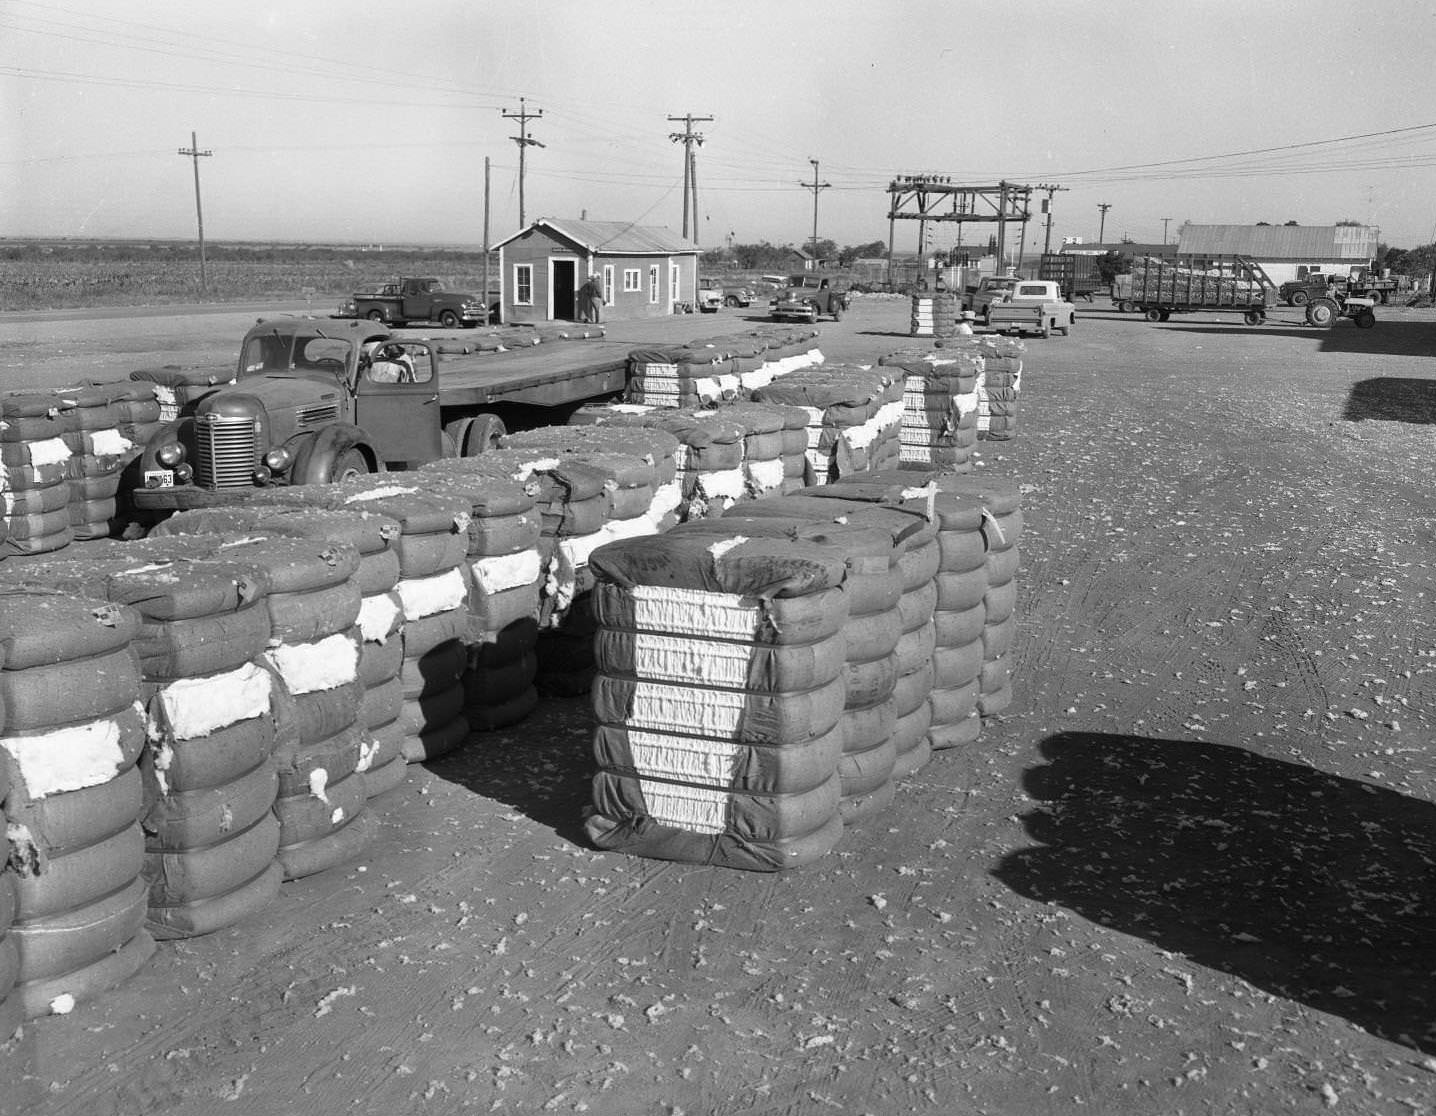 Stacks of Cotton at a Cotton Gin, 1958